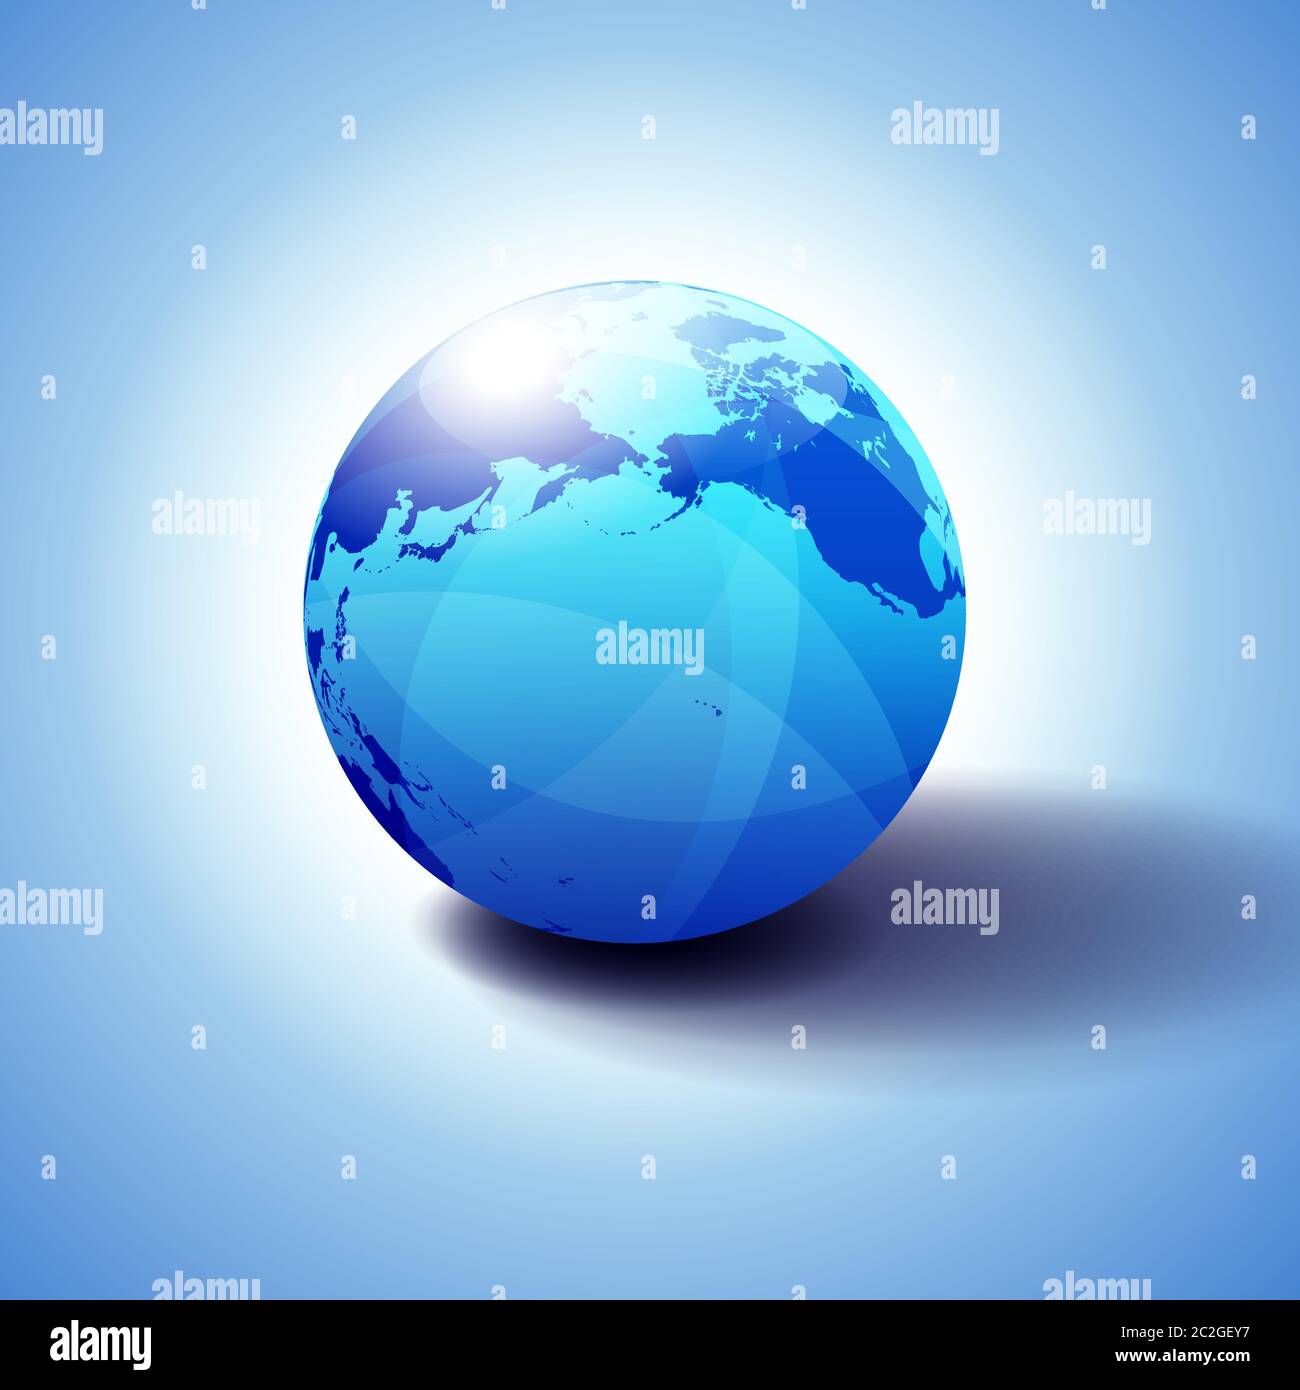 Pacific Rim North America, Canada, Siberia Russia and Hawaii Background with Globe Icon 3D illustration, Glossy, Shiny Sphere with Global Map Stock Vector